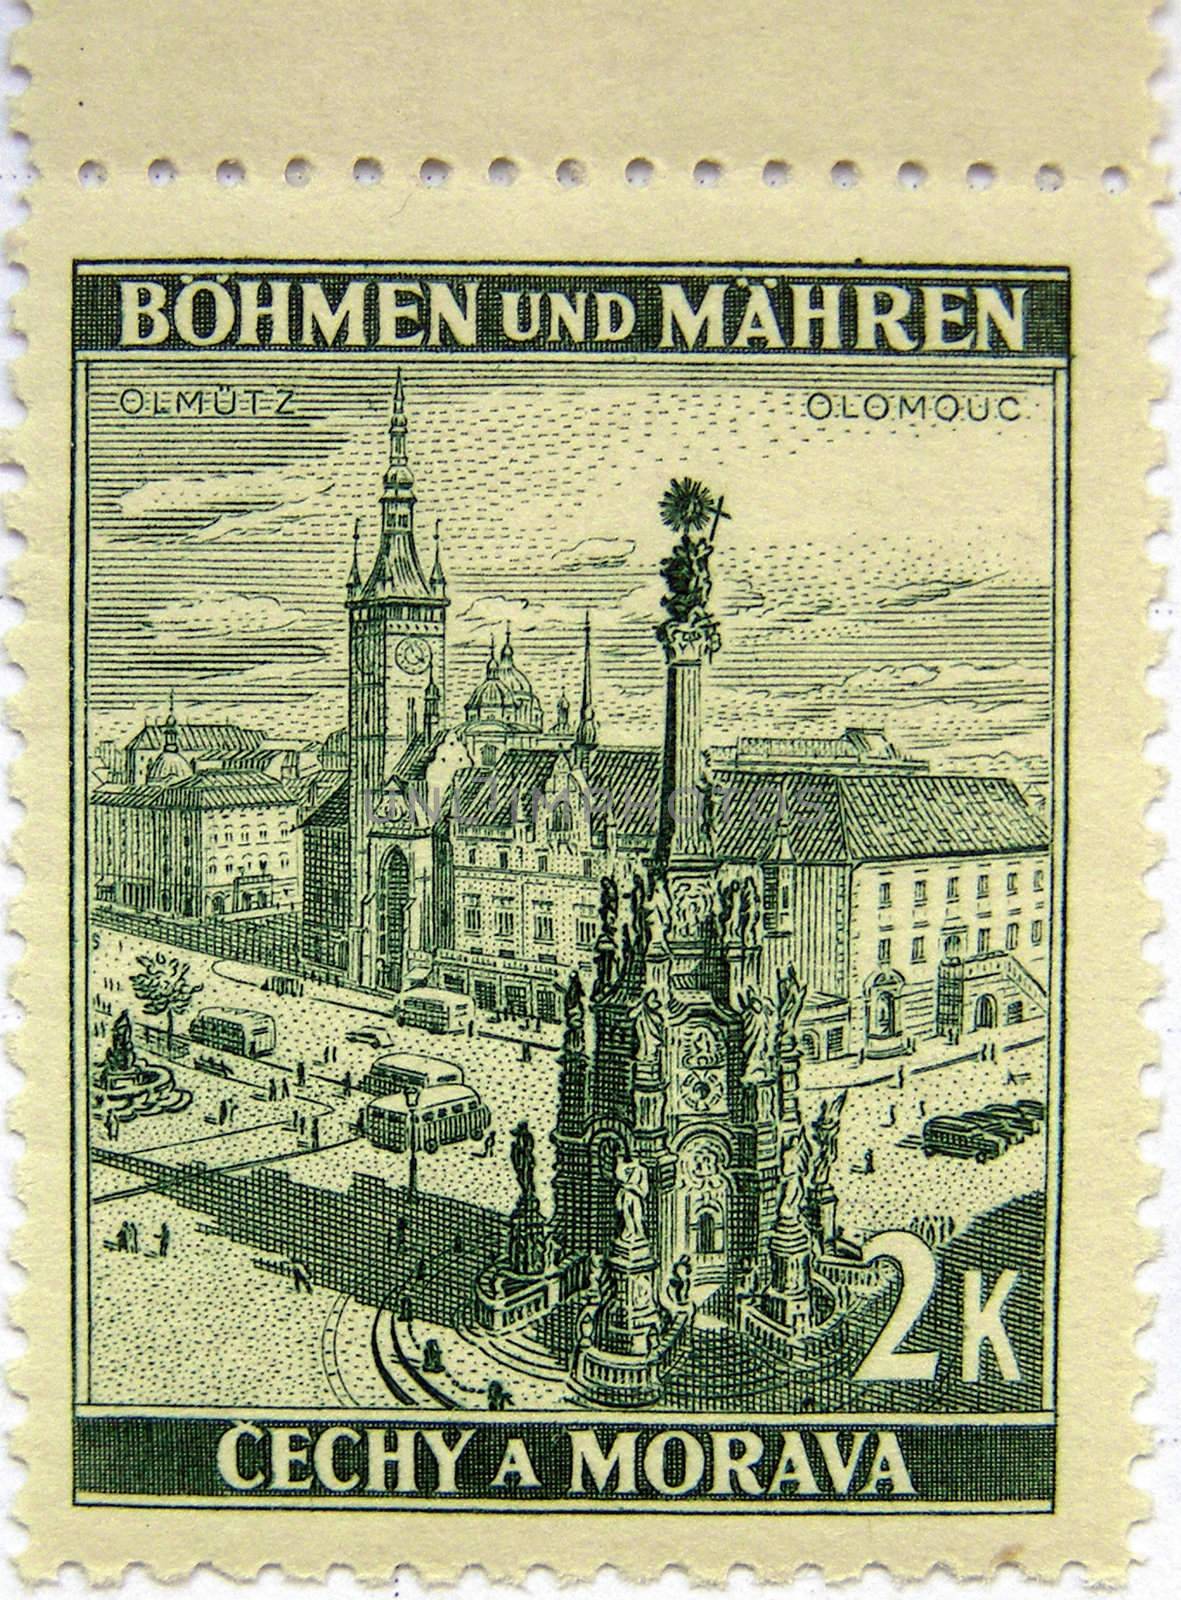 Czech Republic mail postage stamps